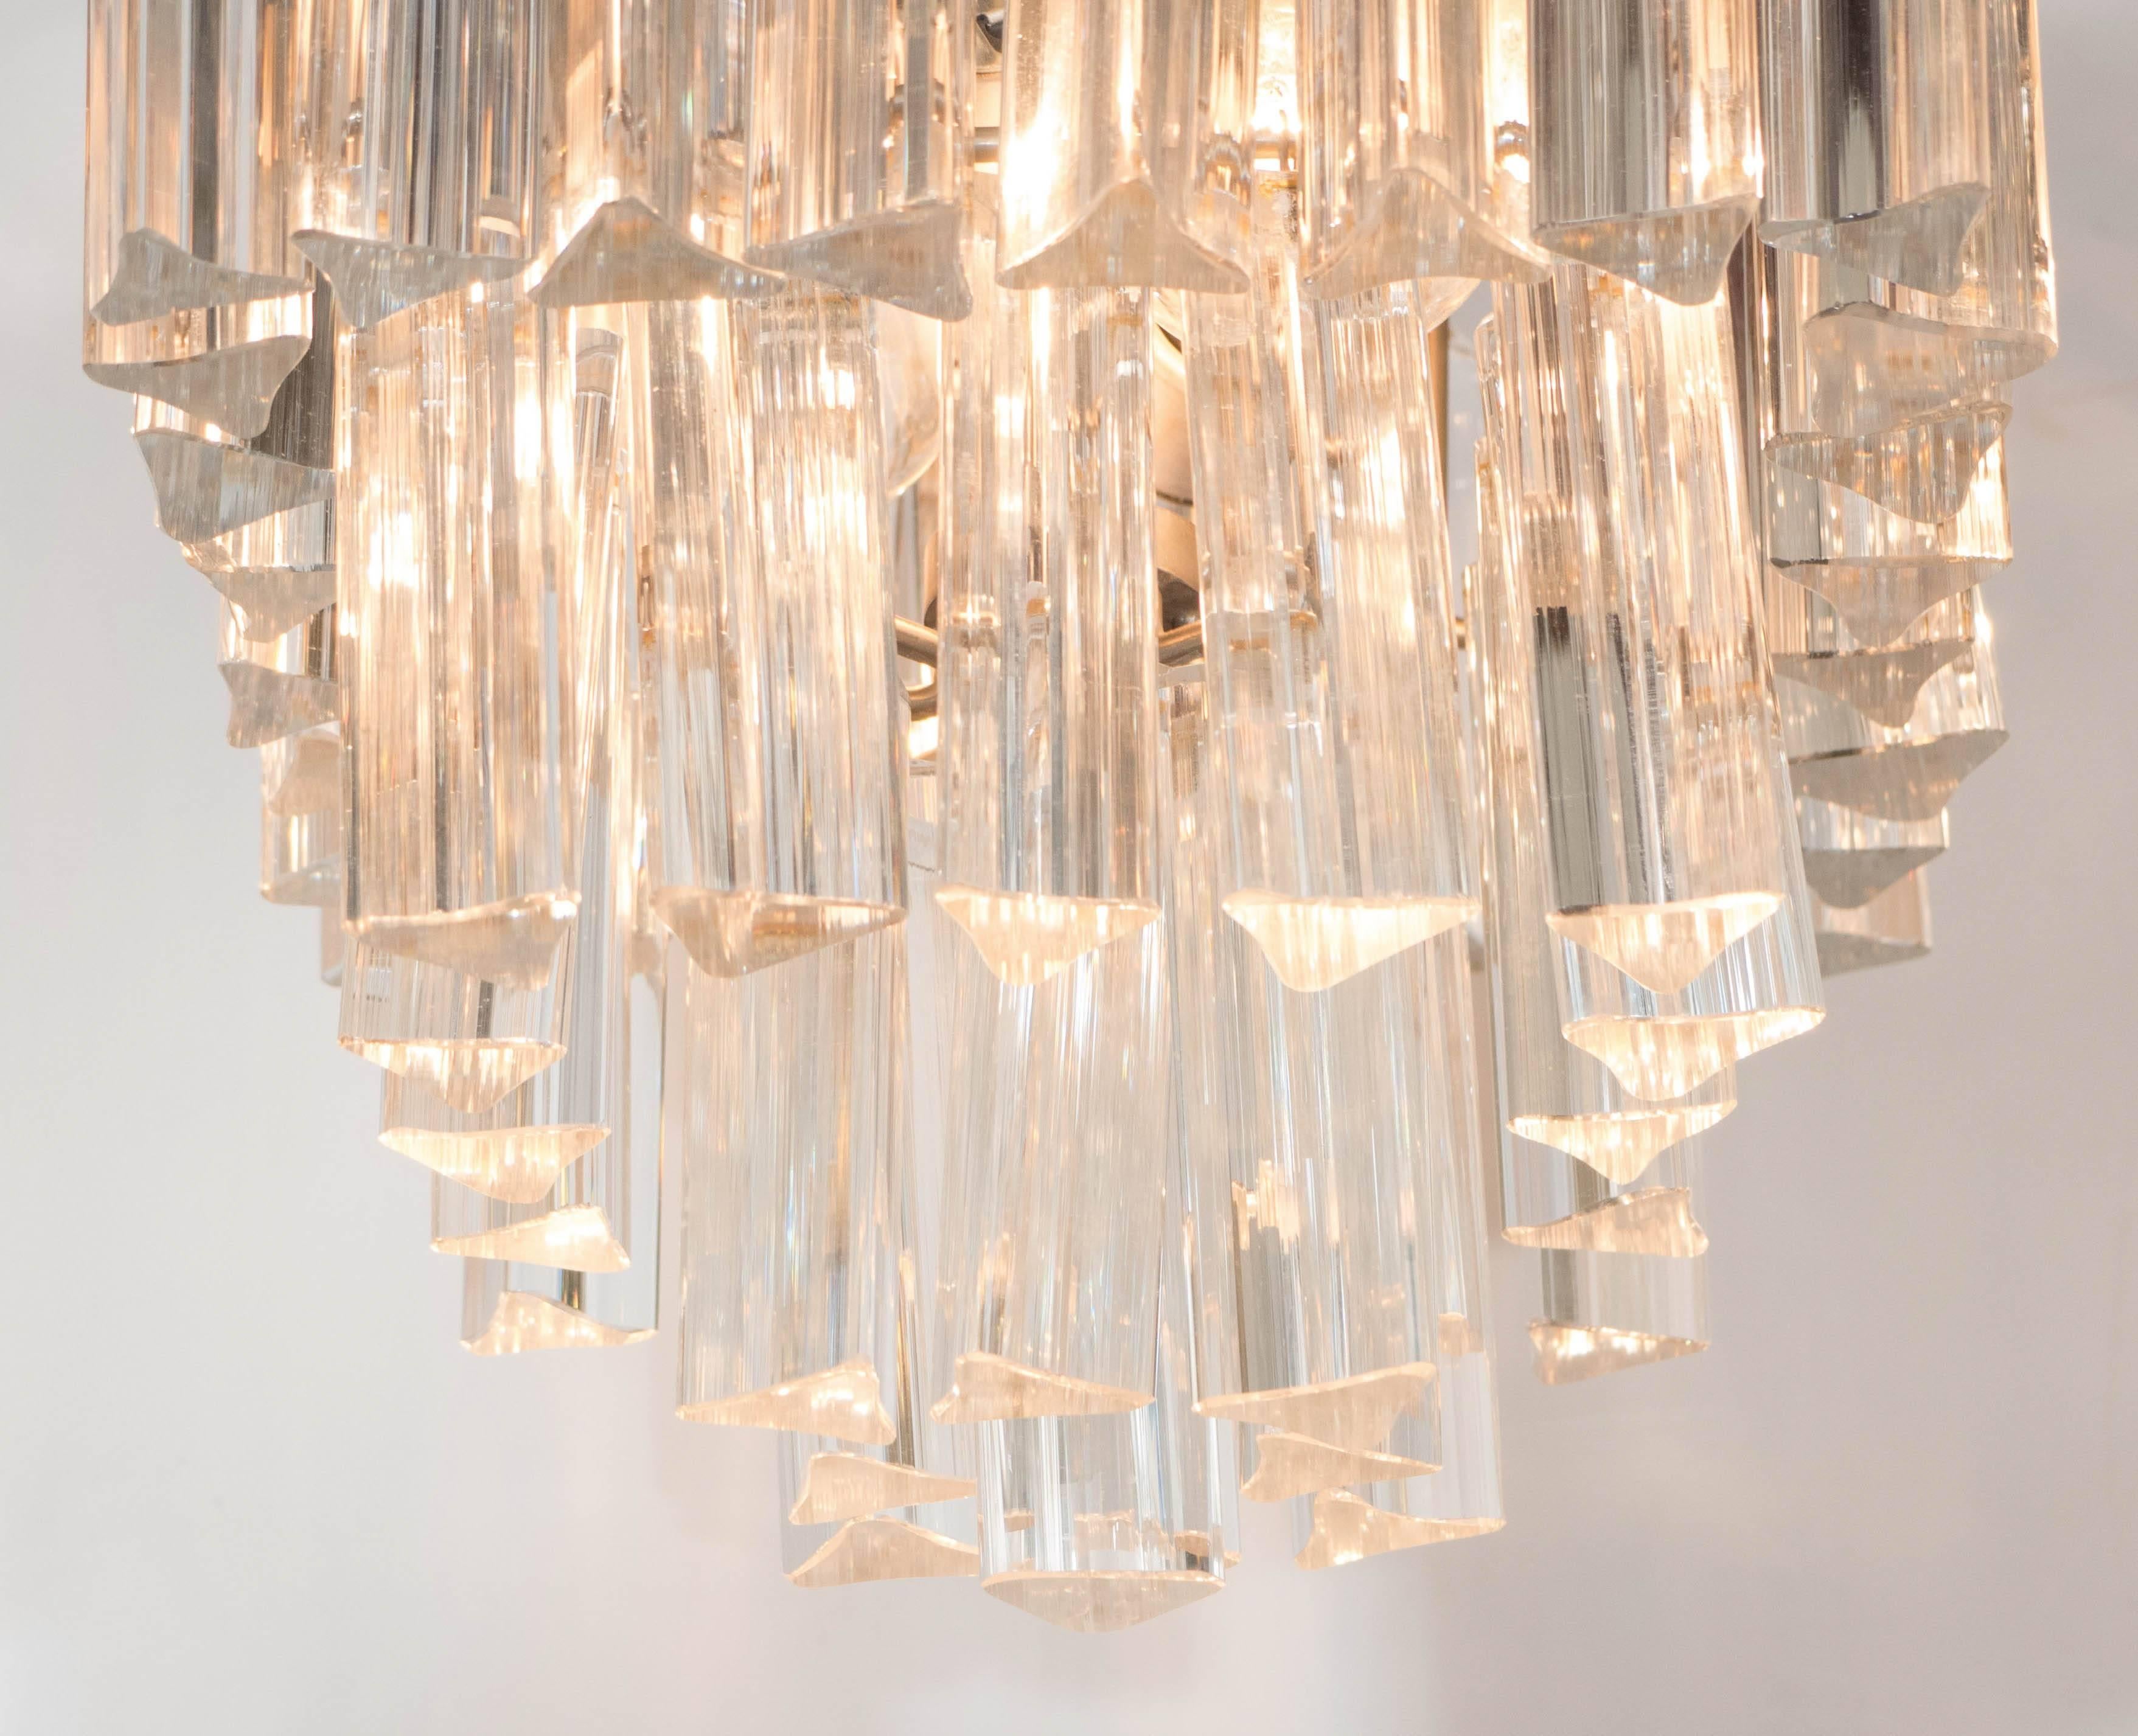 A vintage small-scale chandelier, produced circa 1960s by Venini, with three tiers of 'triedri' Murano glass prisms, suspended from a metal frame. Wiring and sockets to US standard, requires two Edison base bulbs. Very good vintage condition,